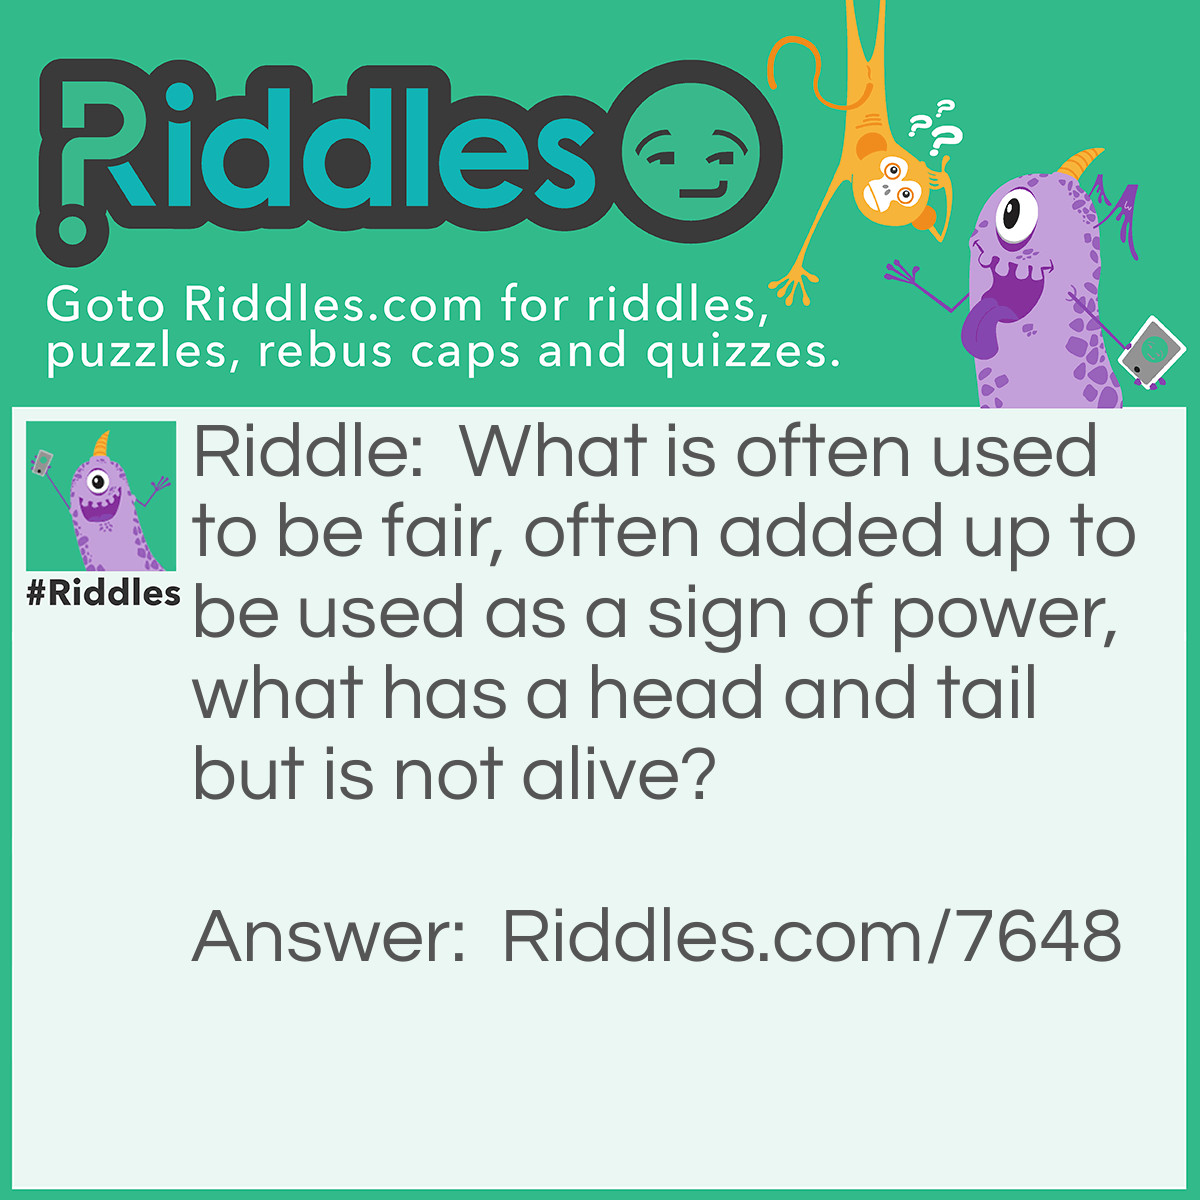 Riddle: What is often used to be fair, often added up to be used as a sign of power, what has a head and tail but is not alive? Answer: A coin.